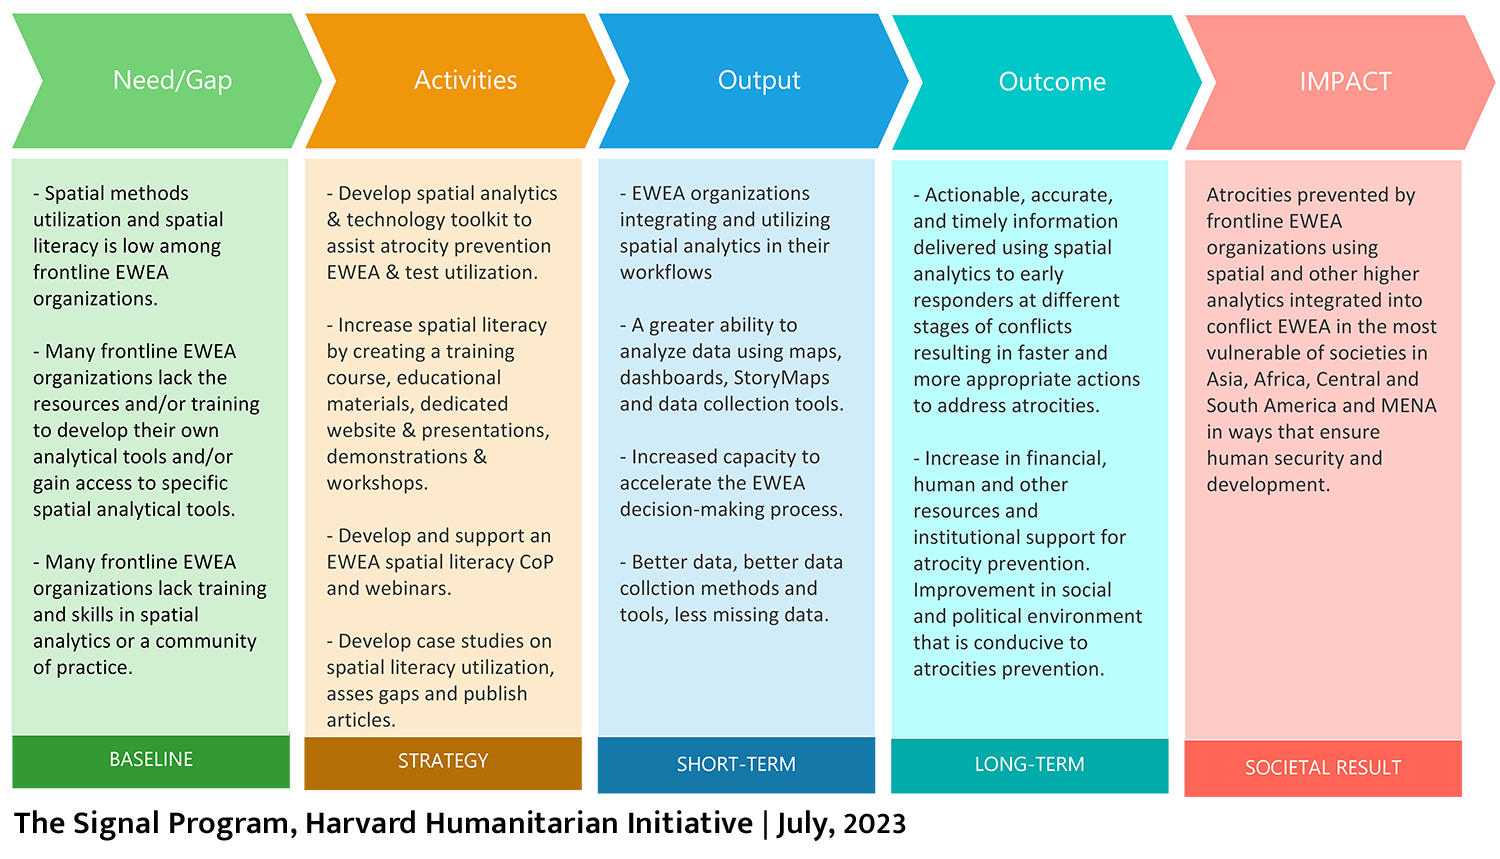 Signal Program Theory of Change listing needs, activities, output, outcomes, and impact